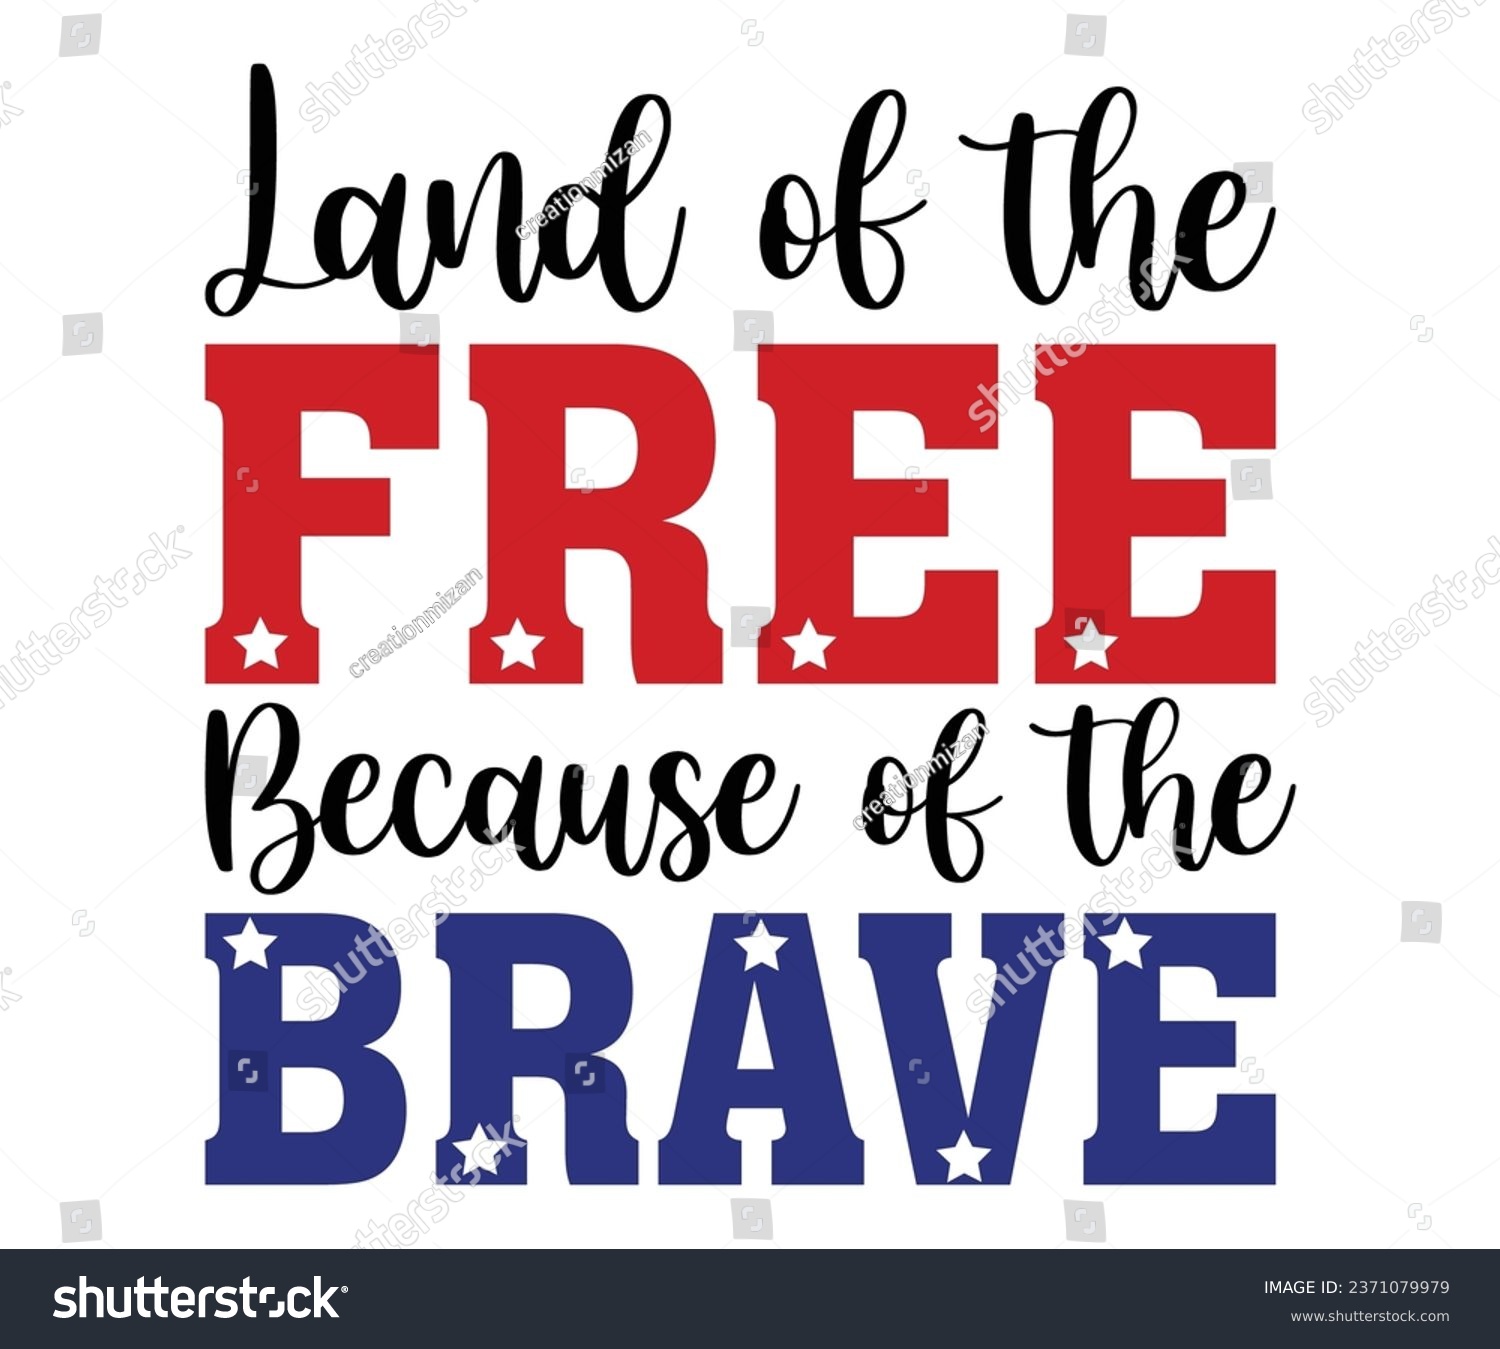 SVG of Land of the free because of the brave Svg,Veteran Clipart,Veteran Cutfile,Veteran Dad svg,Military svg,Military Dad svg,4th of July Clipart,Military Dad Gift Idea     
 svg